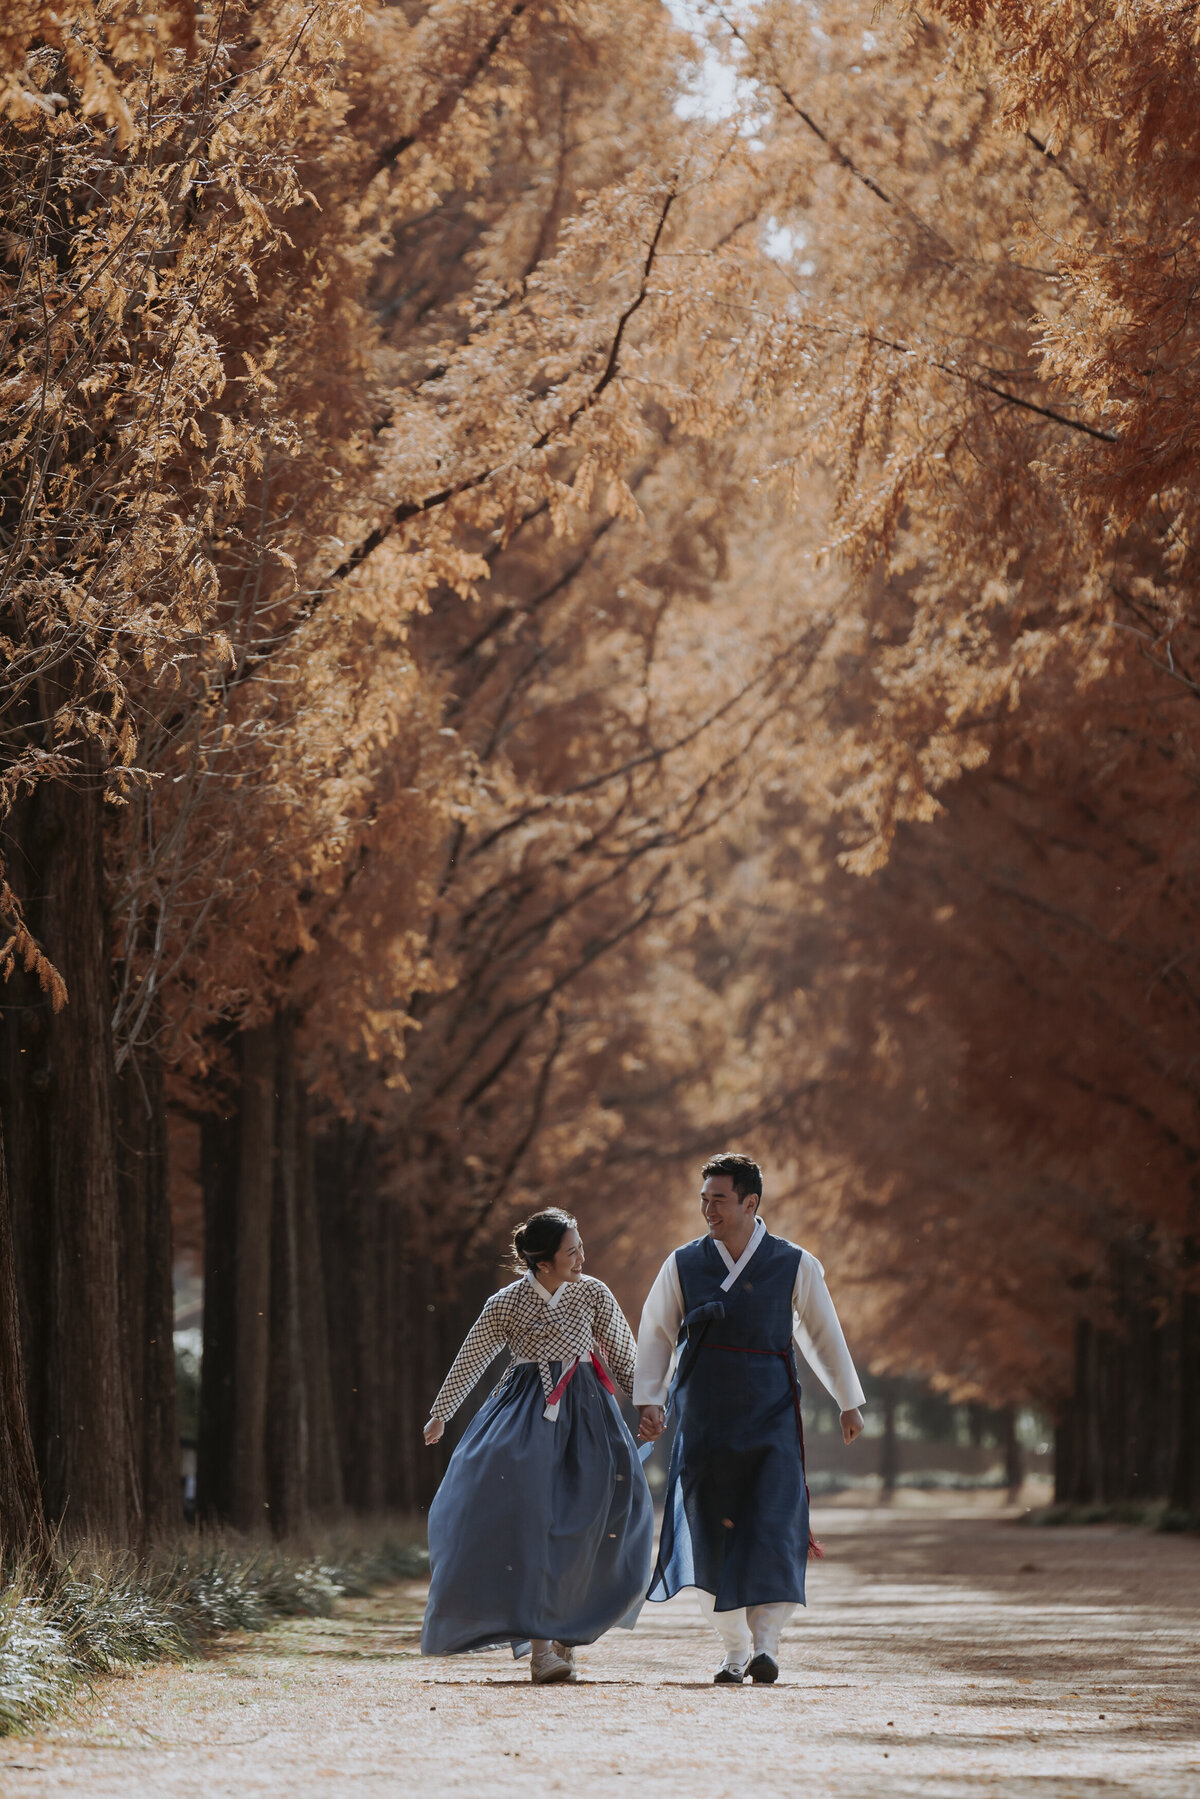 the couple holding hands while walking under the golden metasequioa tress